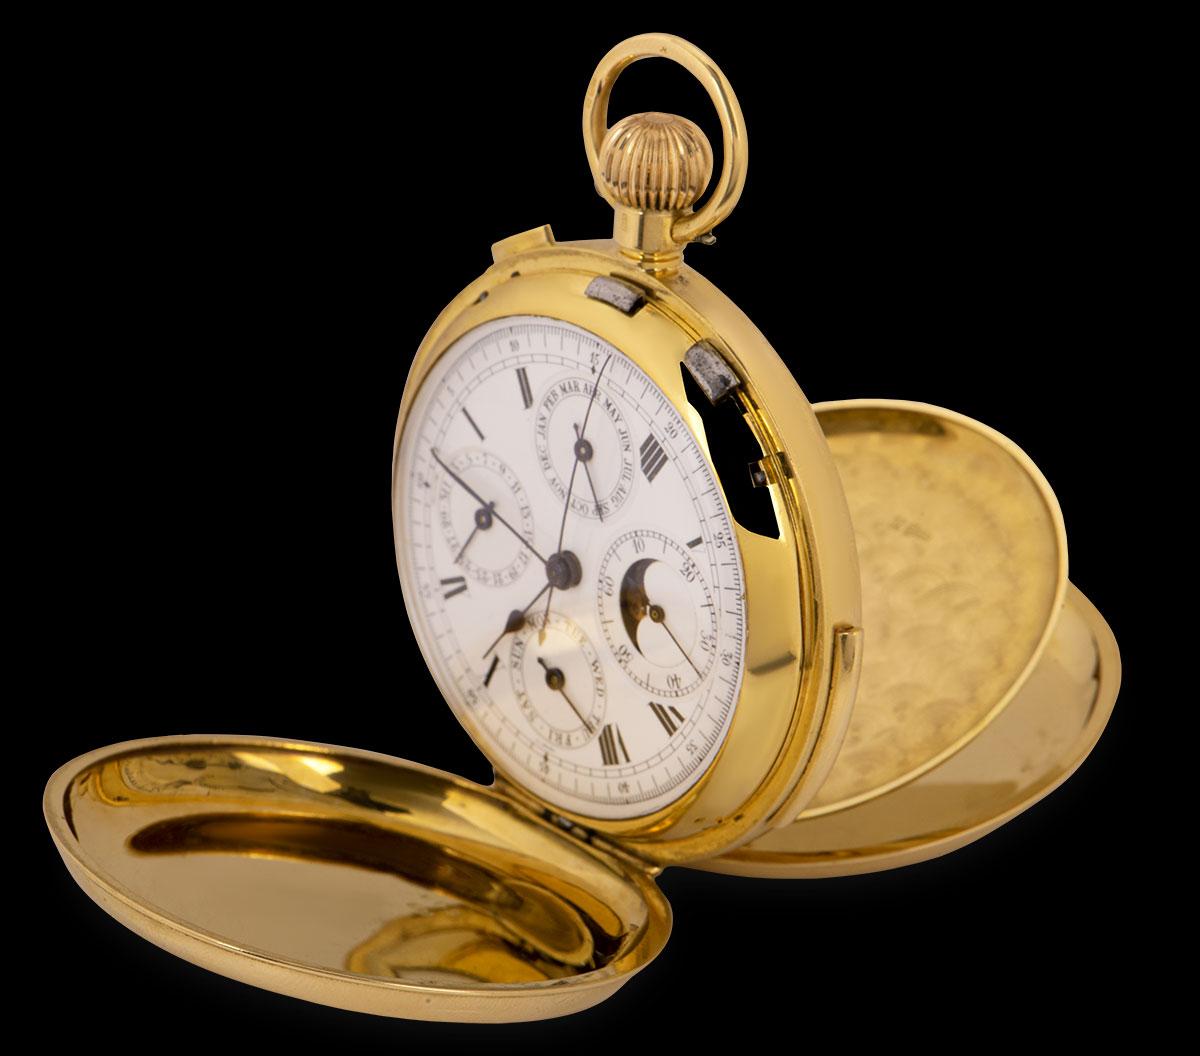 A 55mm 18k Yellow Gold Full Hunter Minute Repeating Calendar Vintage Gents Pocket Watch, white enamel dial with roman numerals, month at 3 0'clock, moonphase display and small seconds at 6 0'clock, day at 9 0'clock, date at 12 0'clock, blued steel